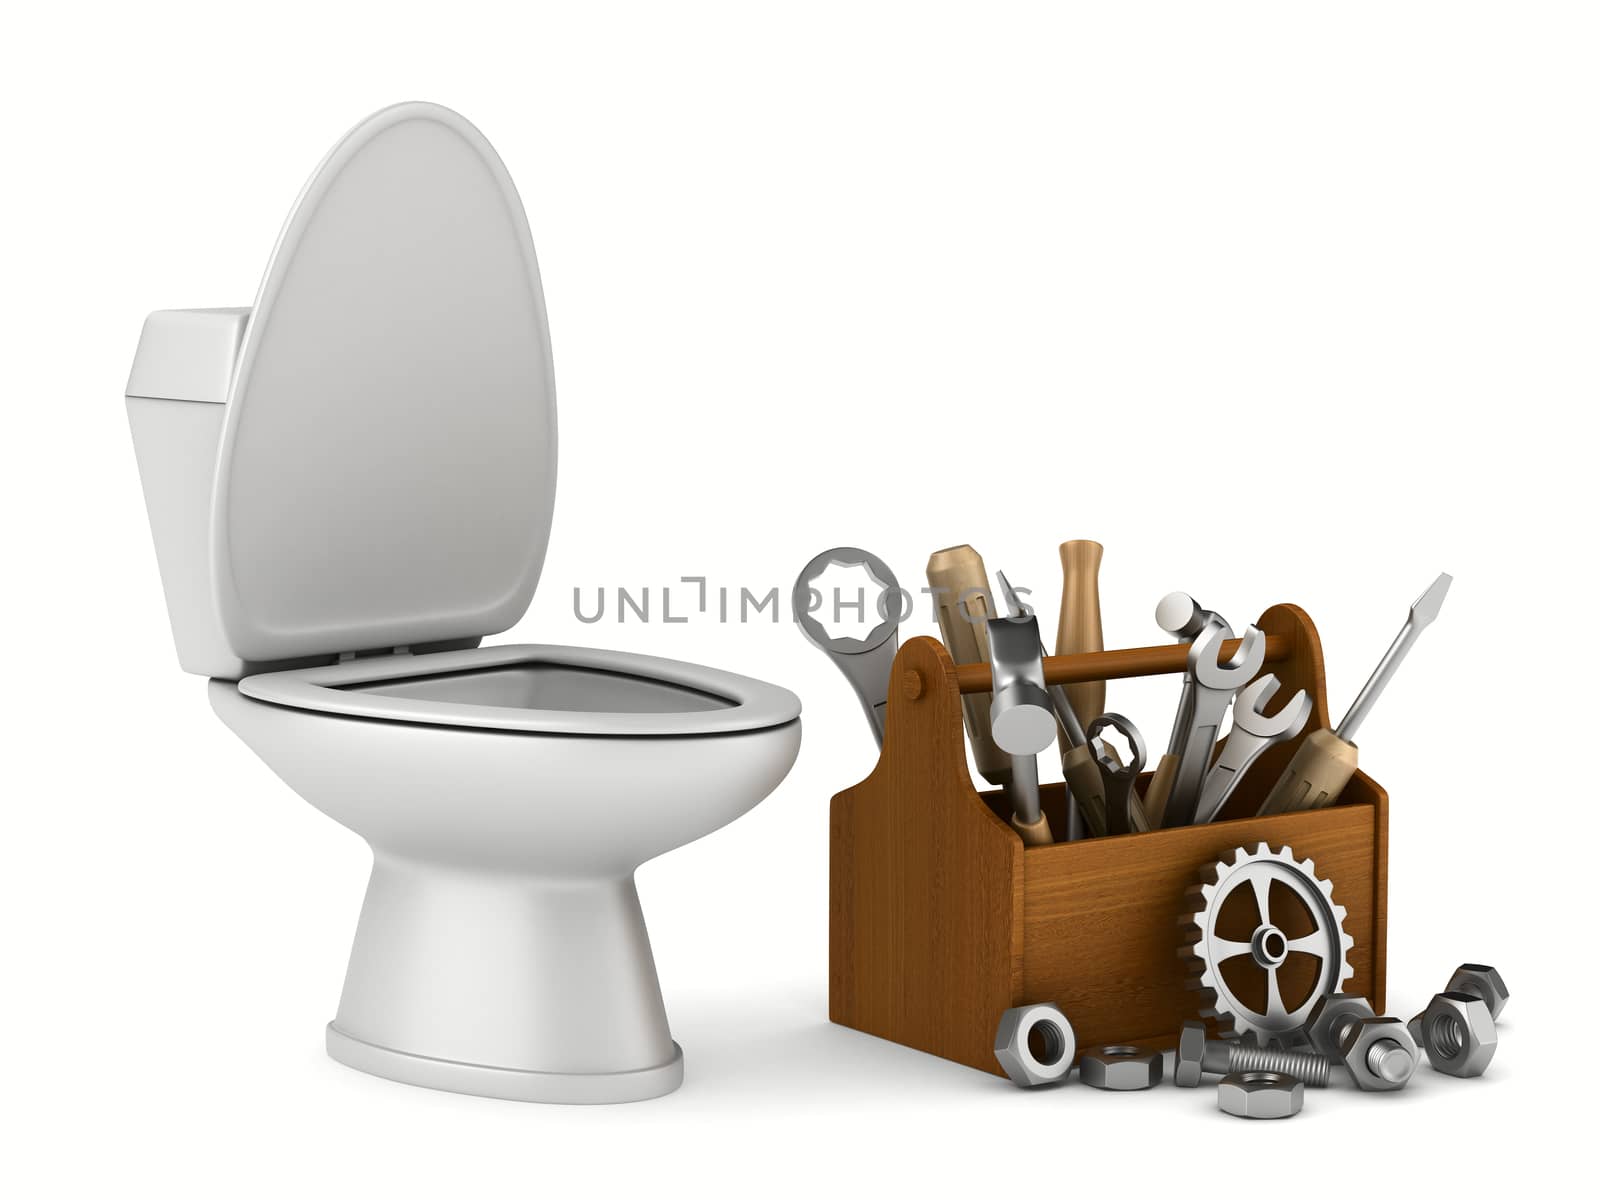 repair toilet on white background. Isolated 3D image